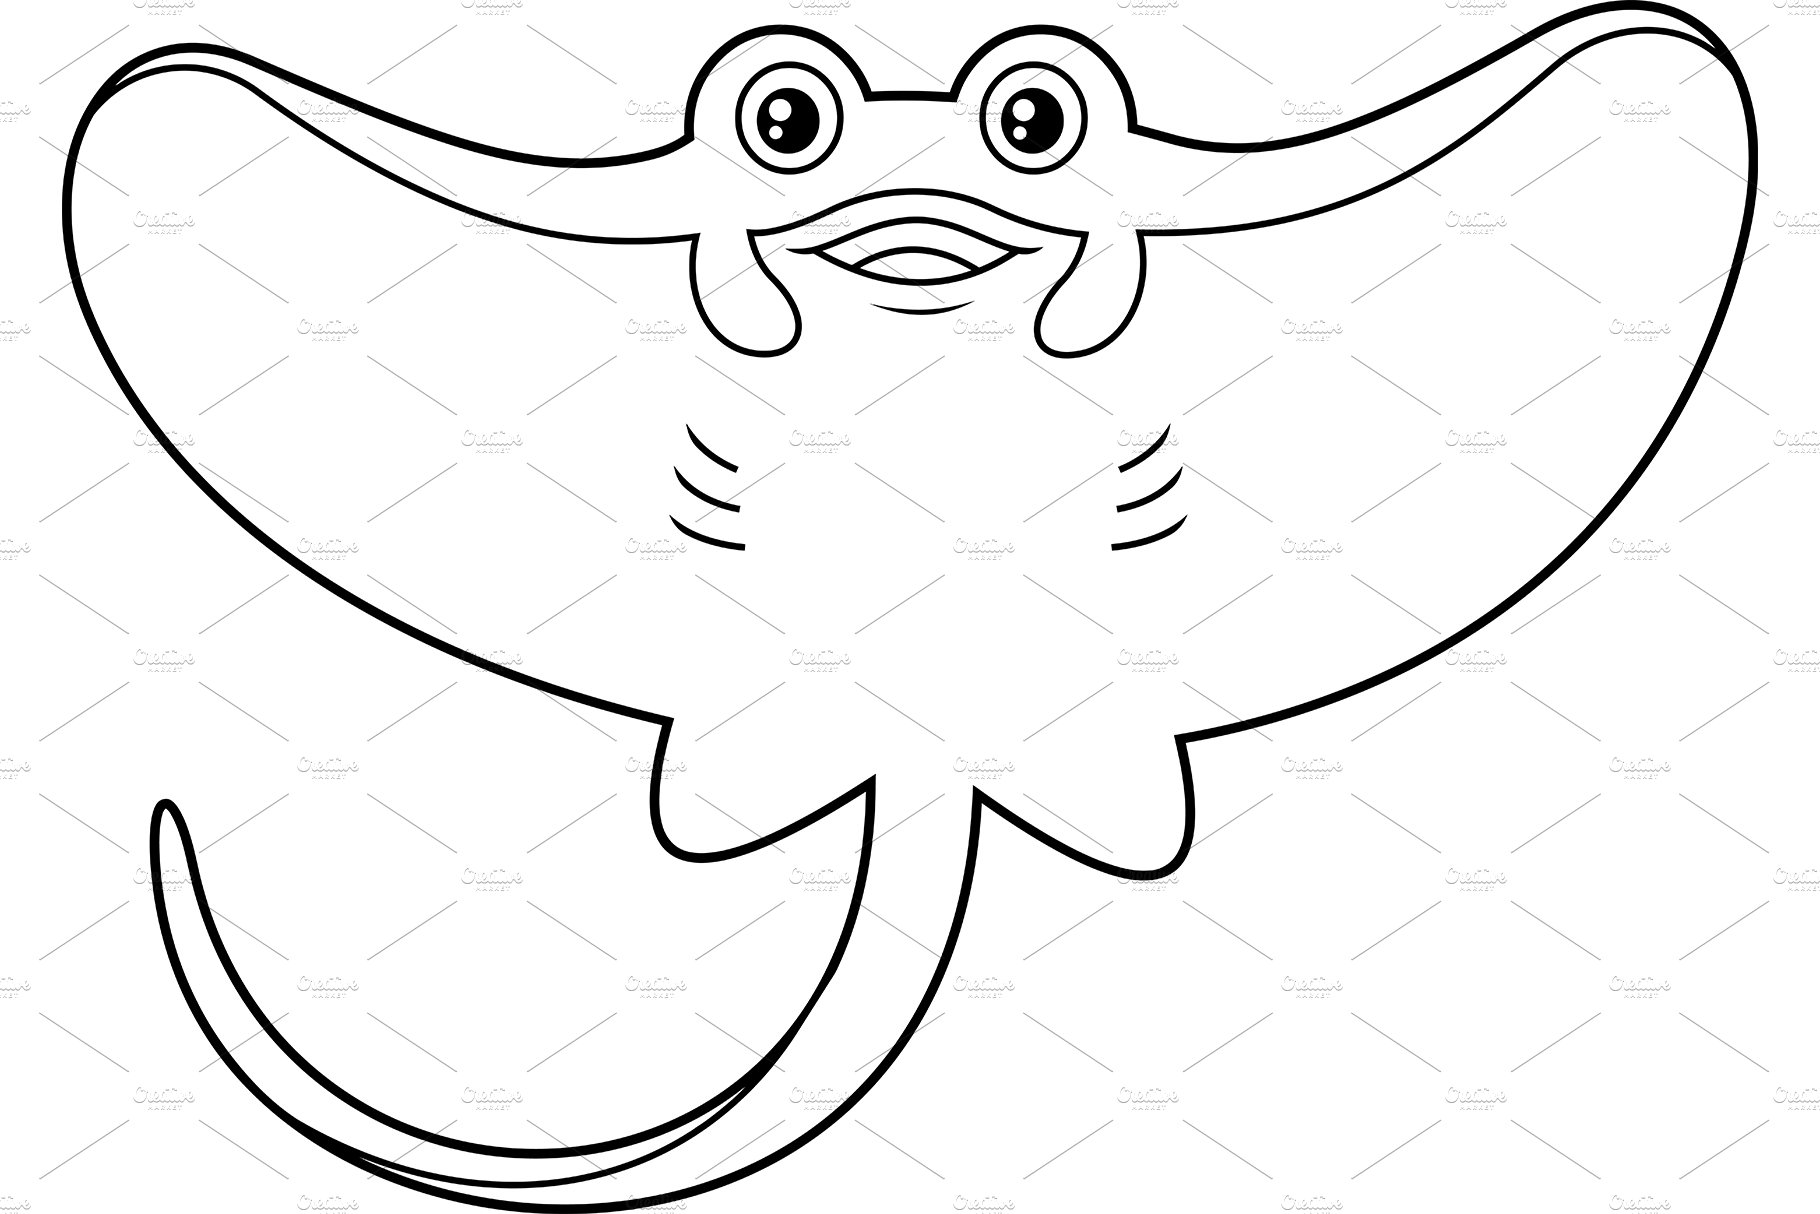 Outlined cute stingray fish â